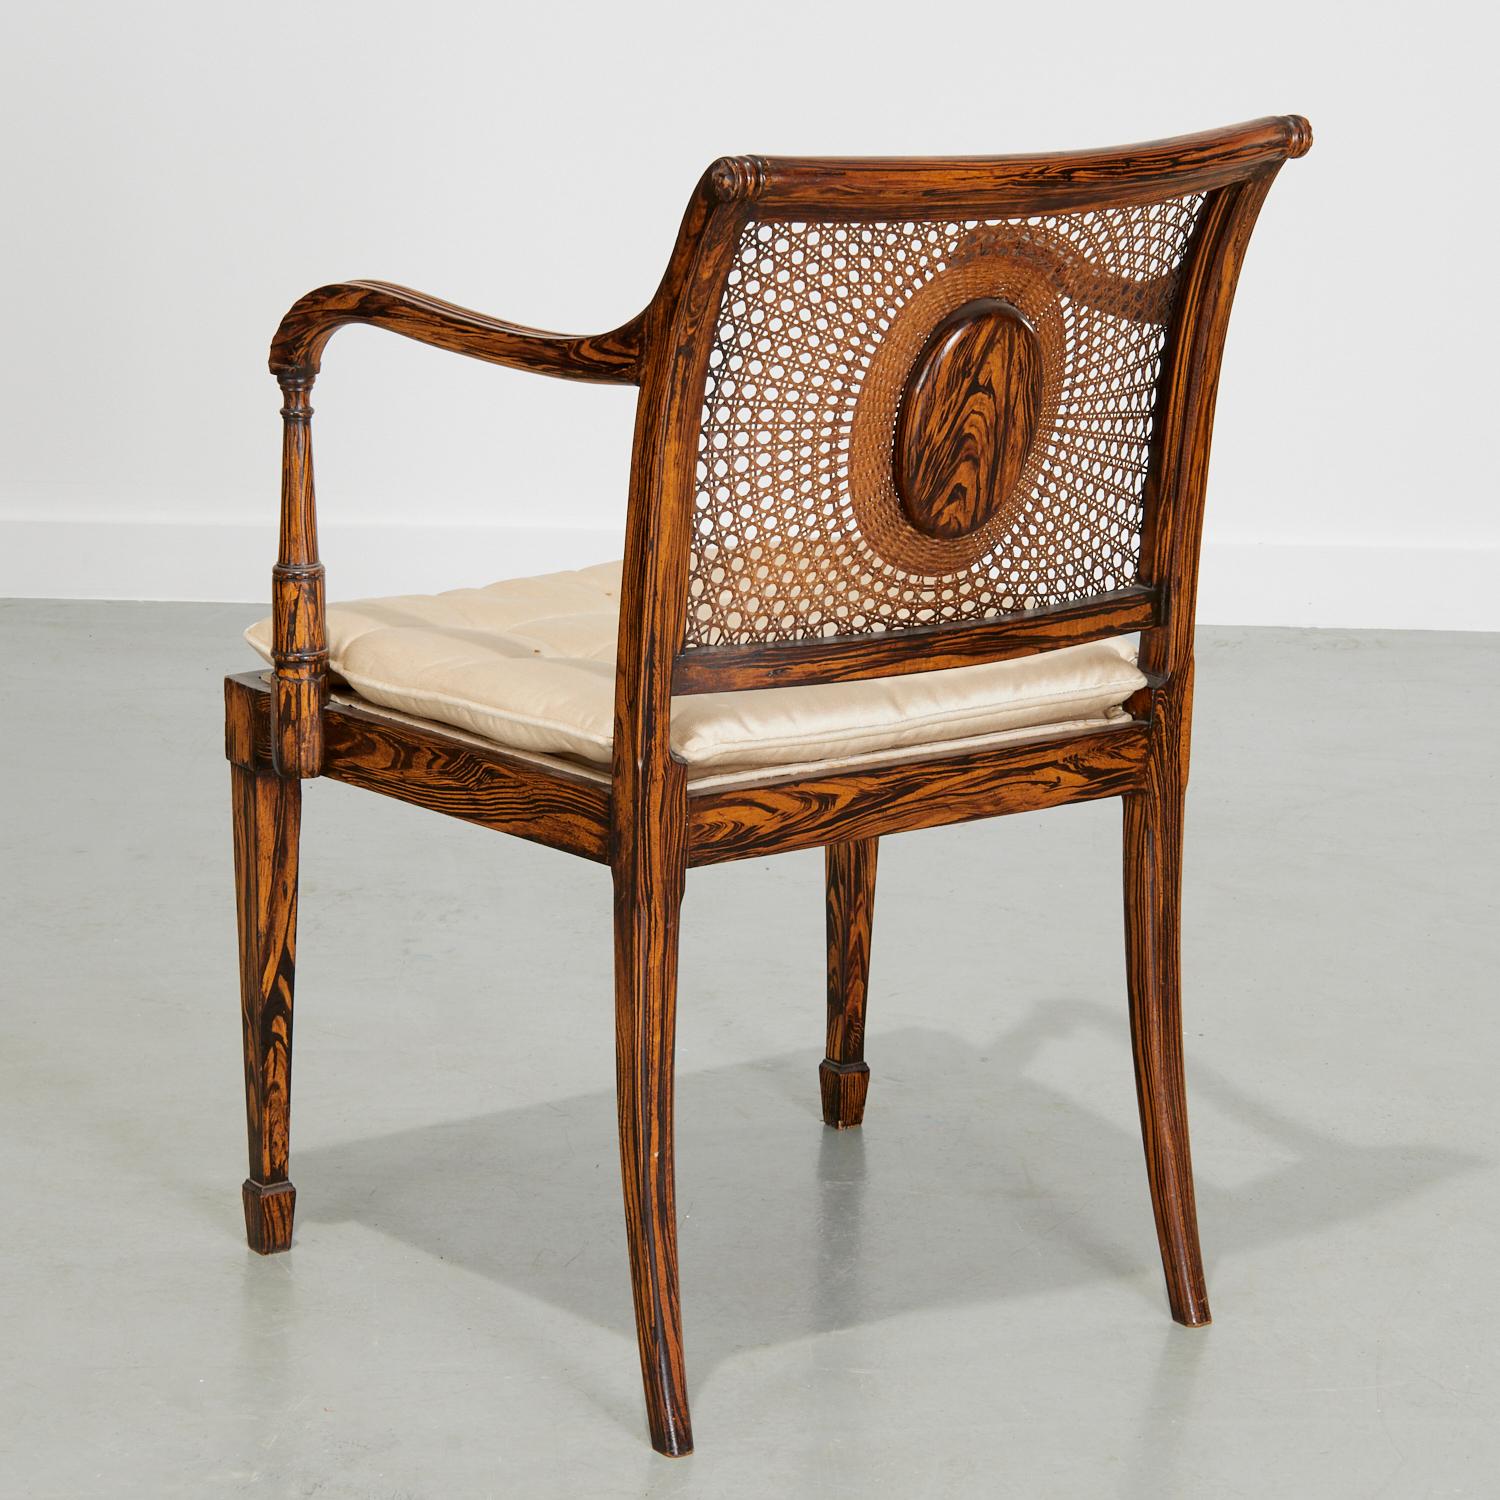 Mid-20th Century Vintage Regency Style Grain Painted Armchair with Cane Back and Upholstered Seat